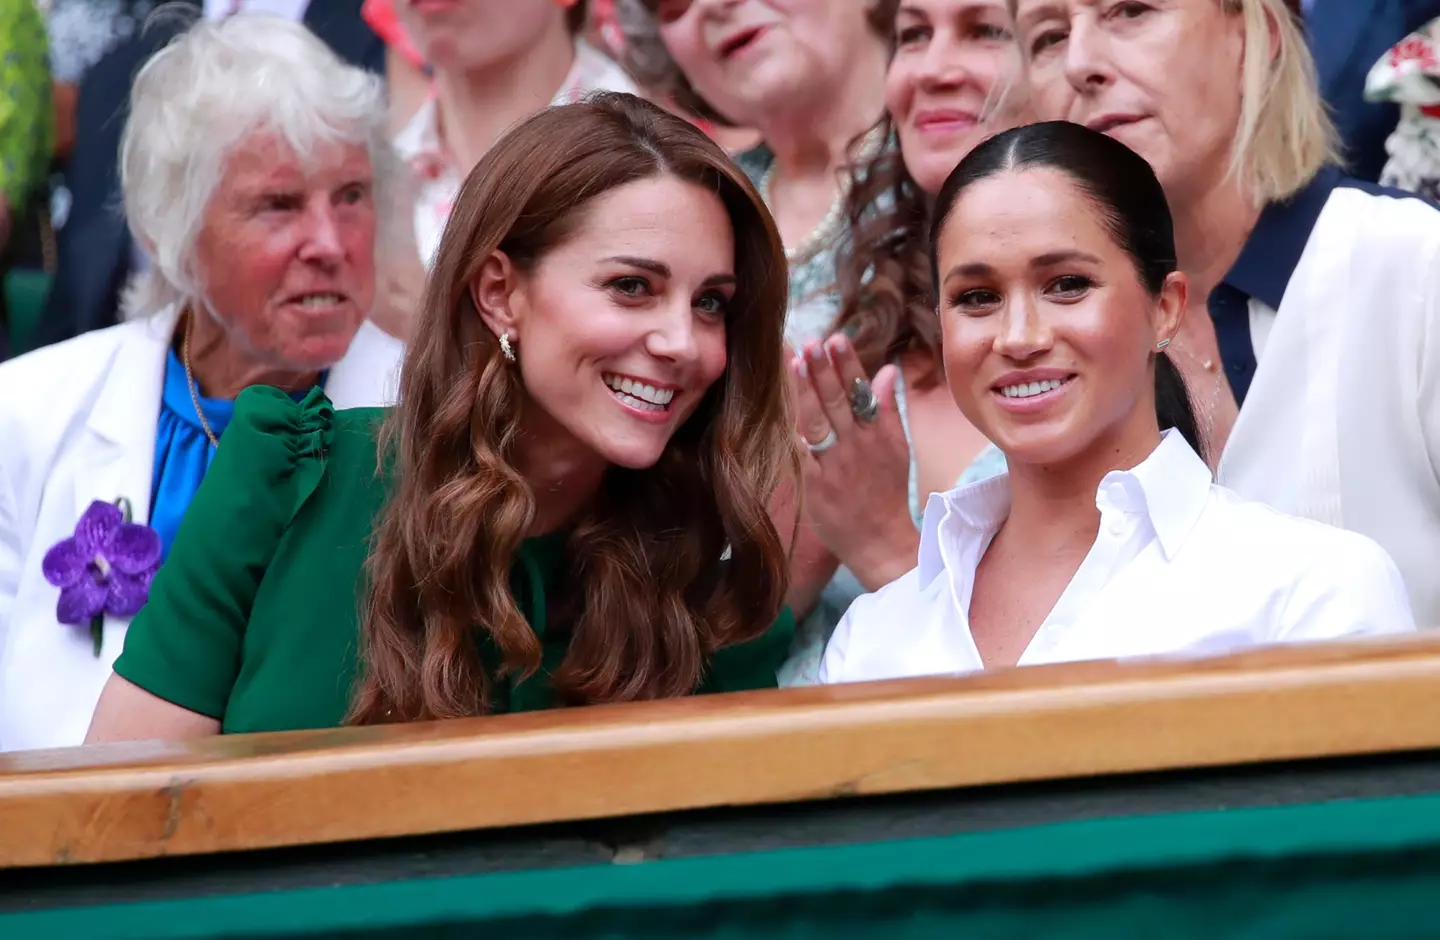 There was little score between Kate Middleton and Meghan Markle.